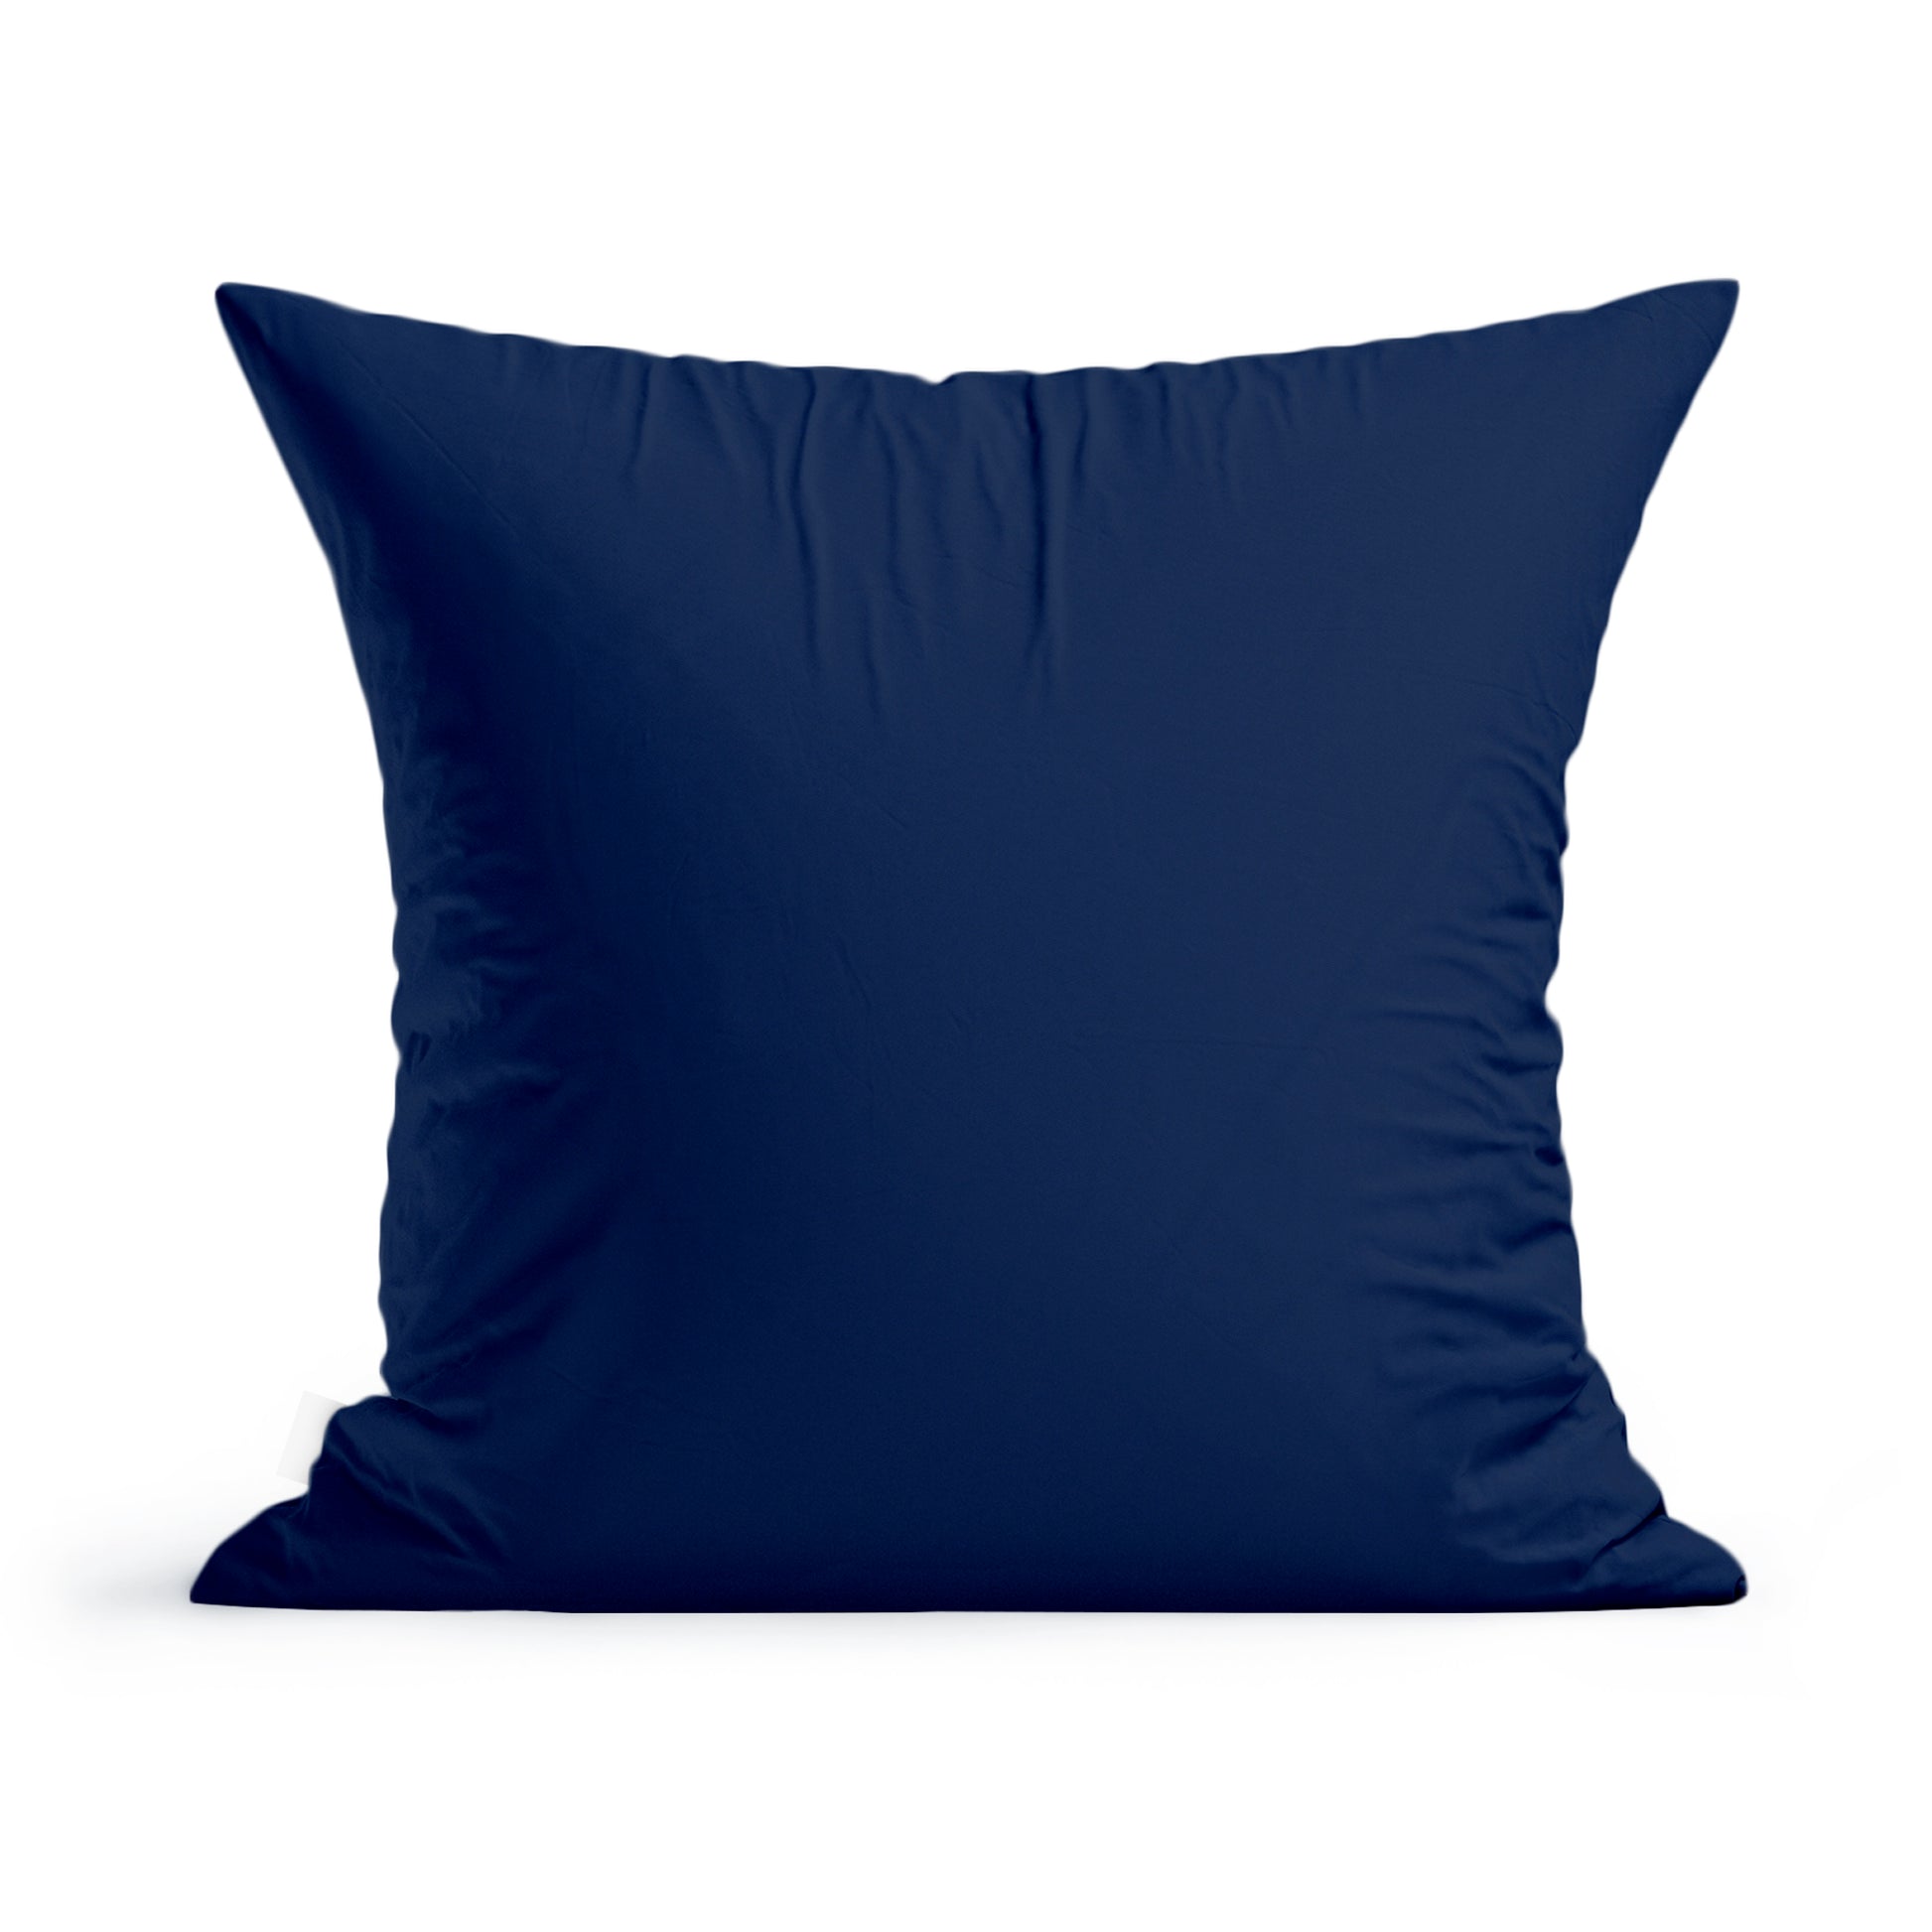 A square navy blue pillow with a smooth fabric sits against a white background. The edges of the Maine Pinecones Pillow by Rustic County are neatly sewn, and the surface appears even and clean.